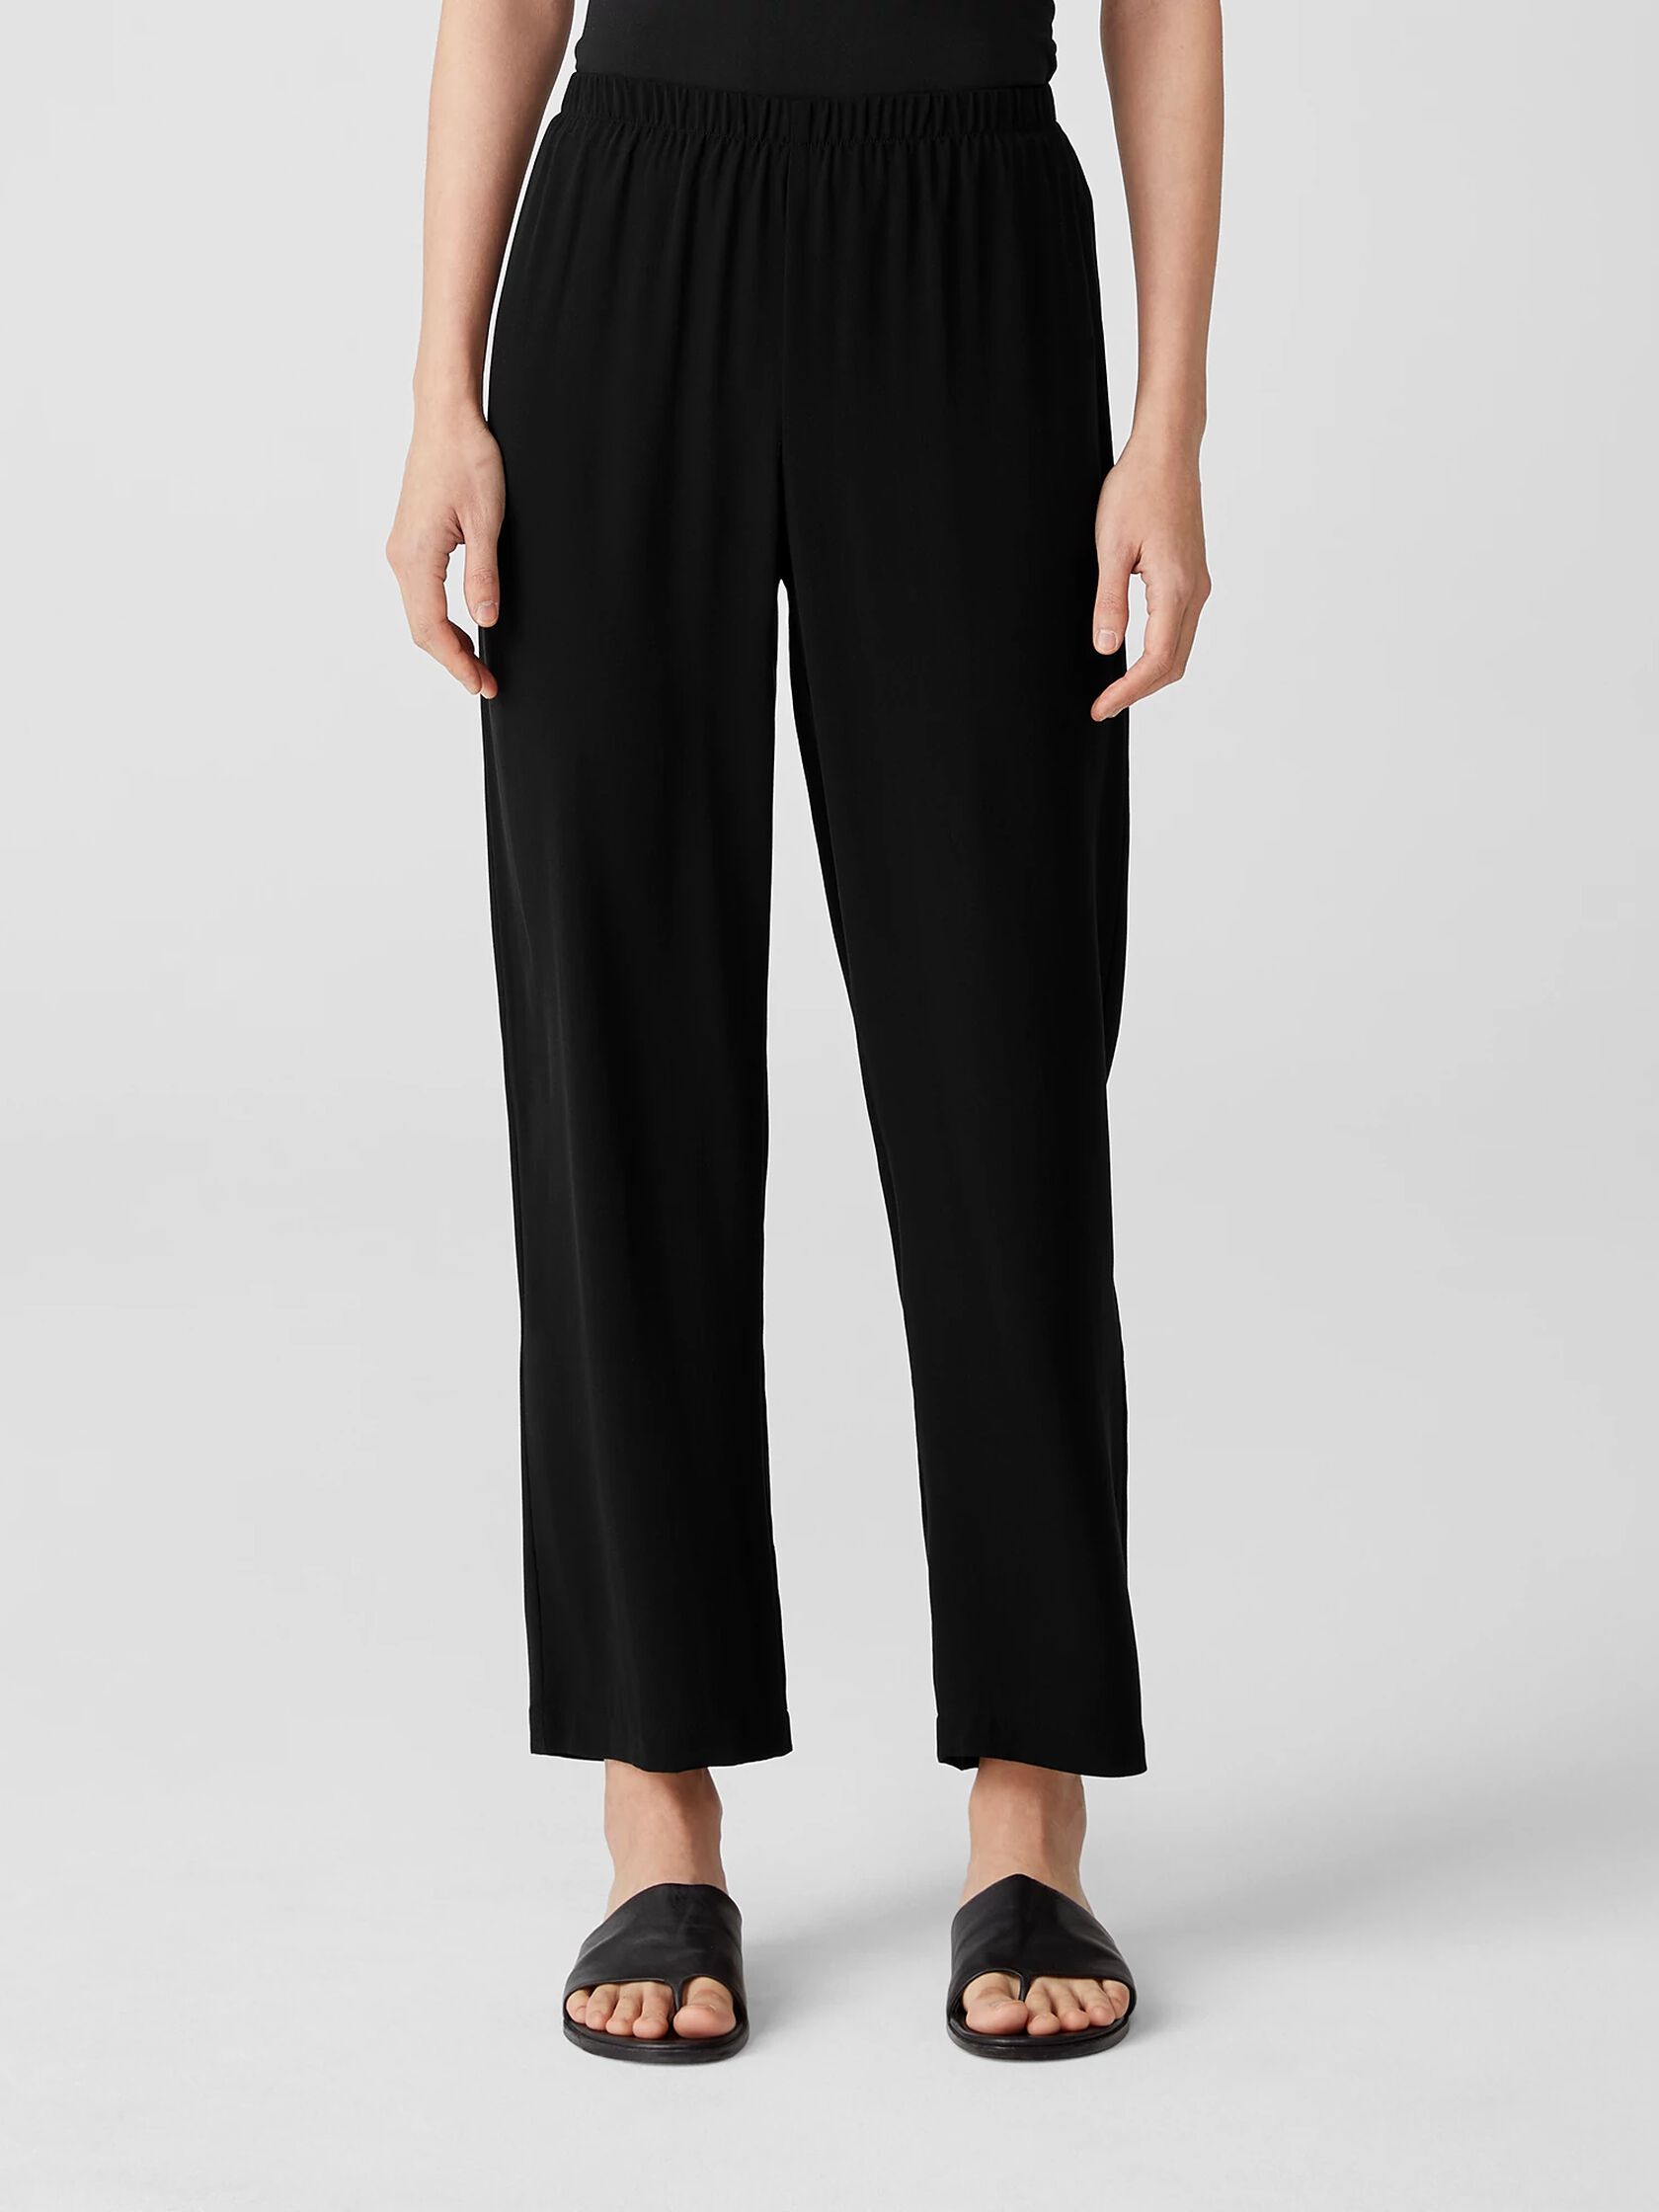 Review: Eileen Fisher Silk Straight Crop Pants - Pocketful of Joules